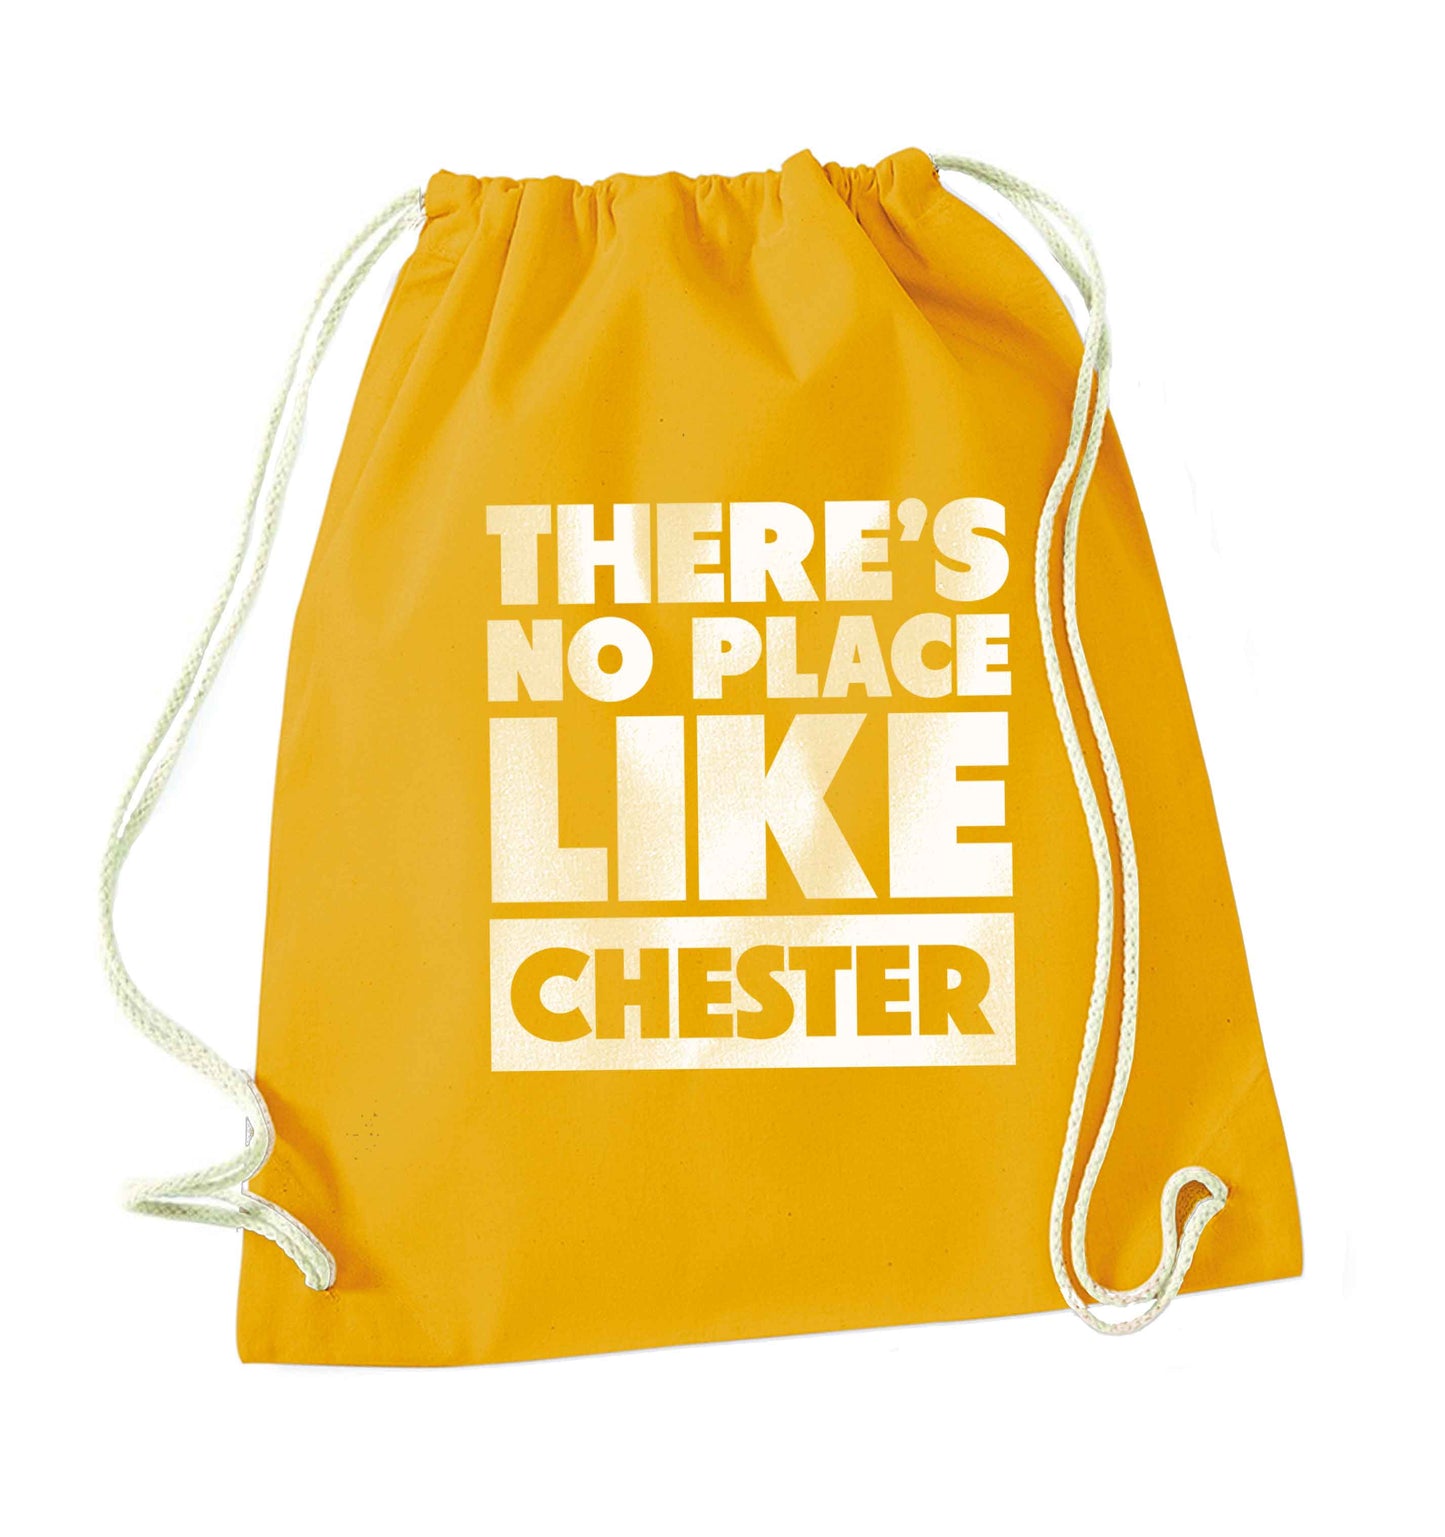 There's no place like Chester mustard drawstring bag